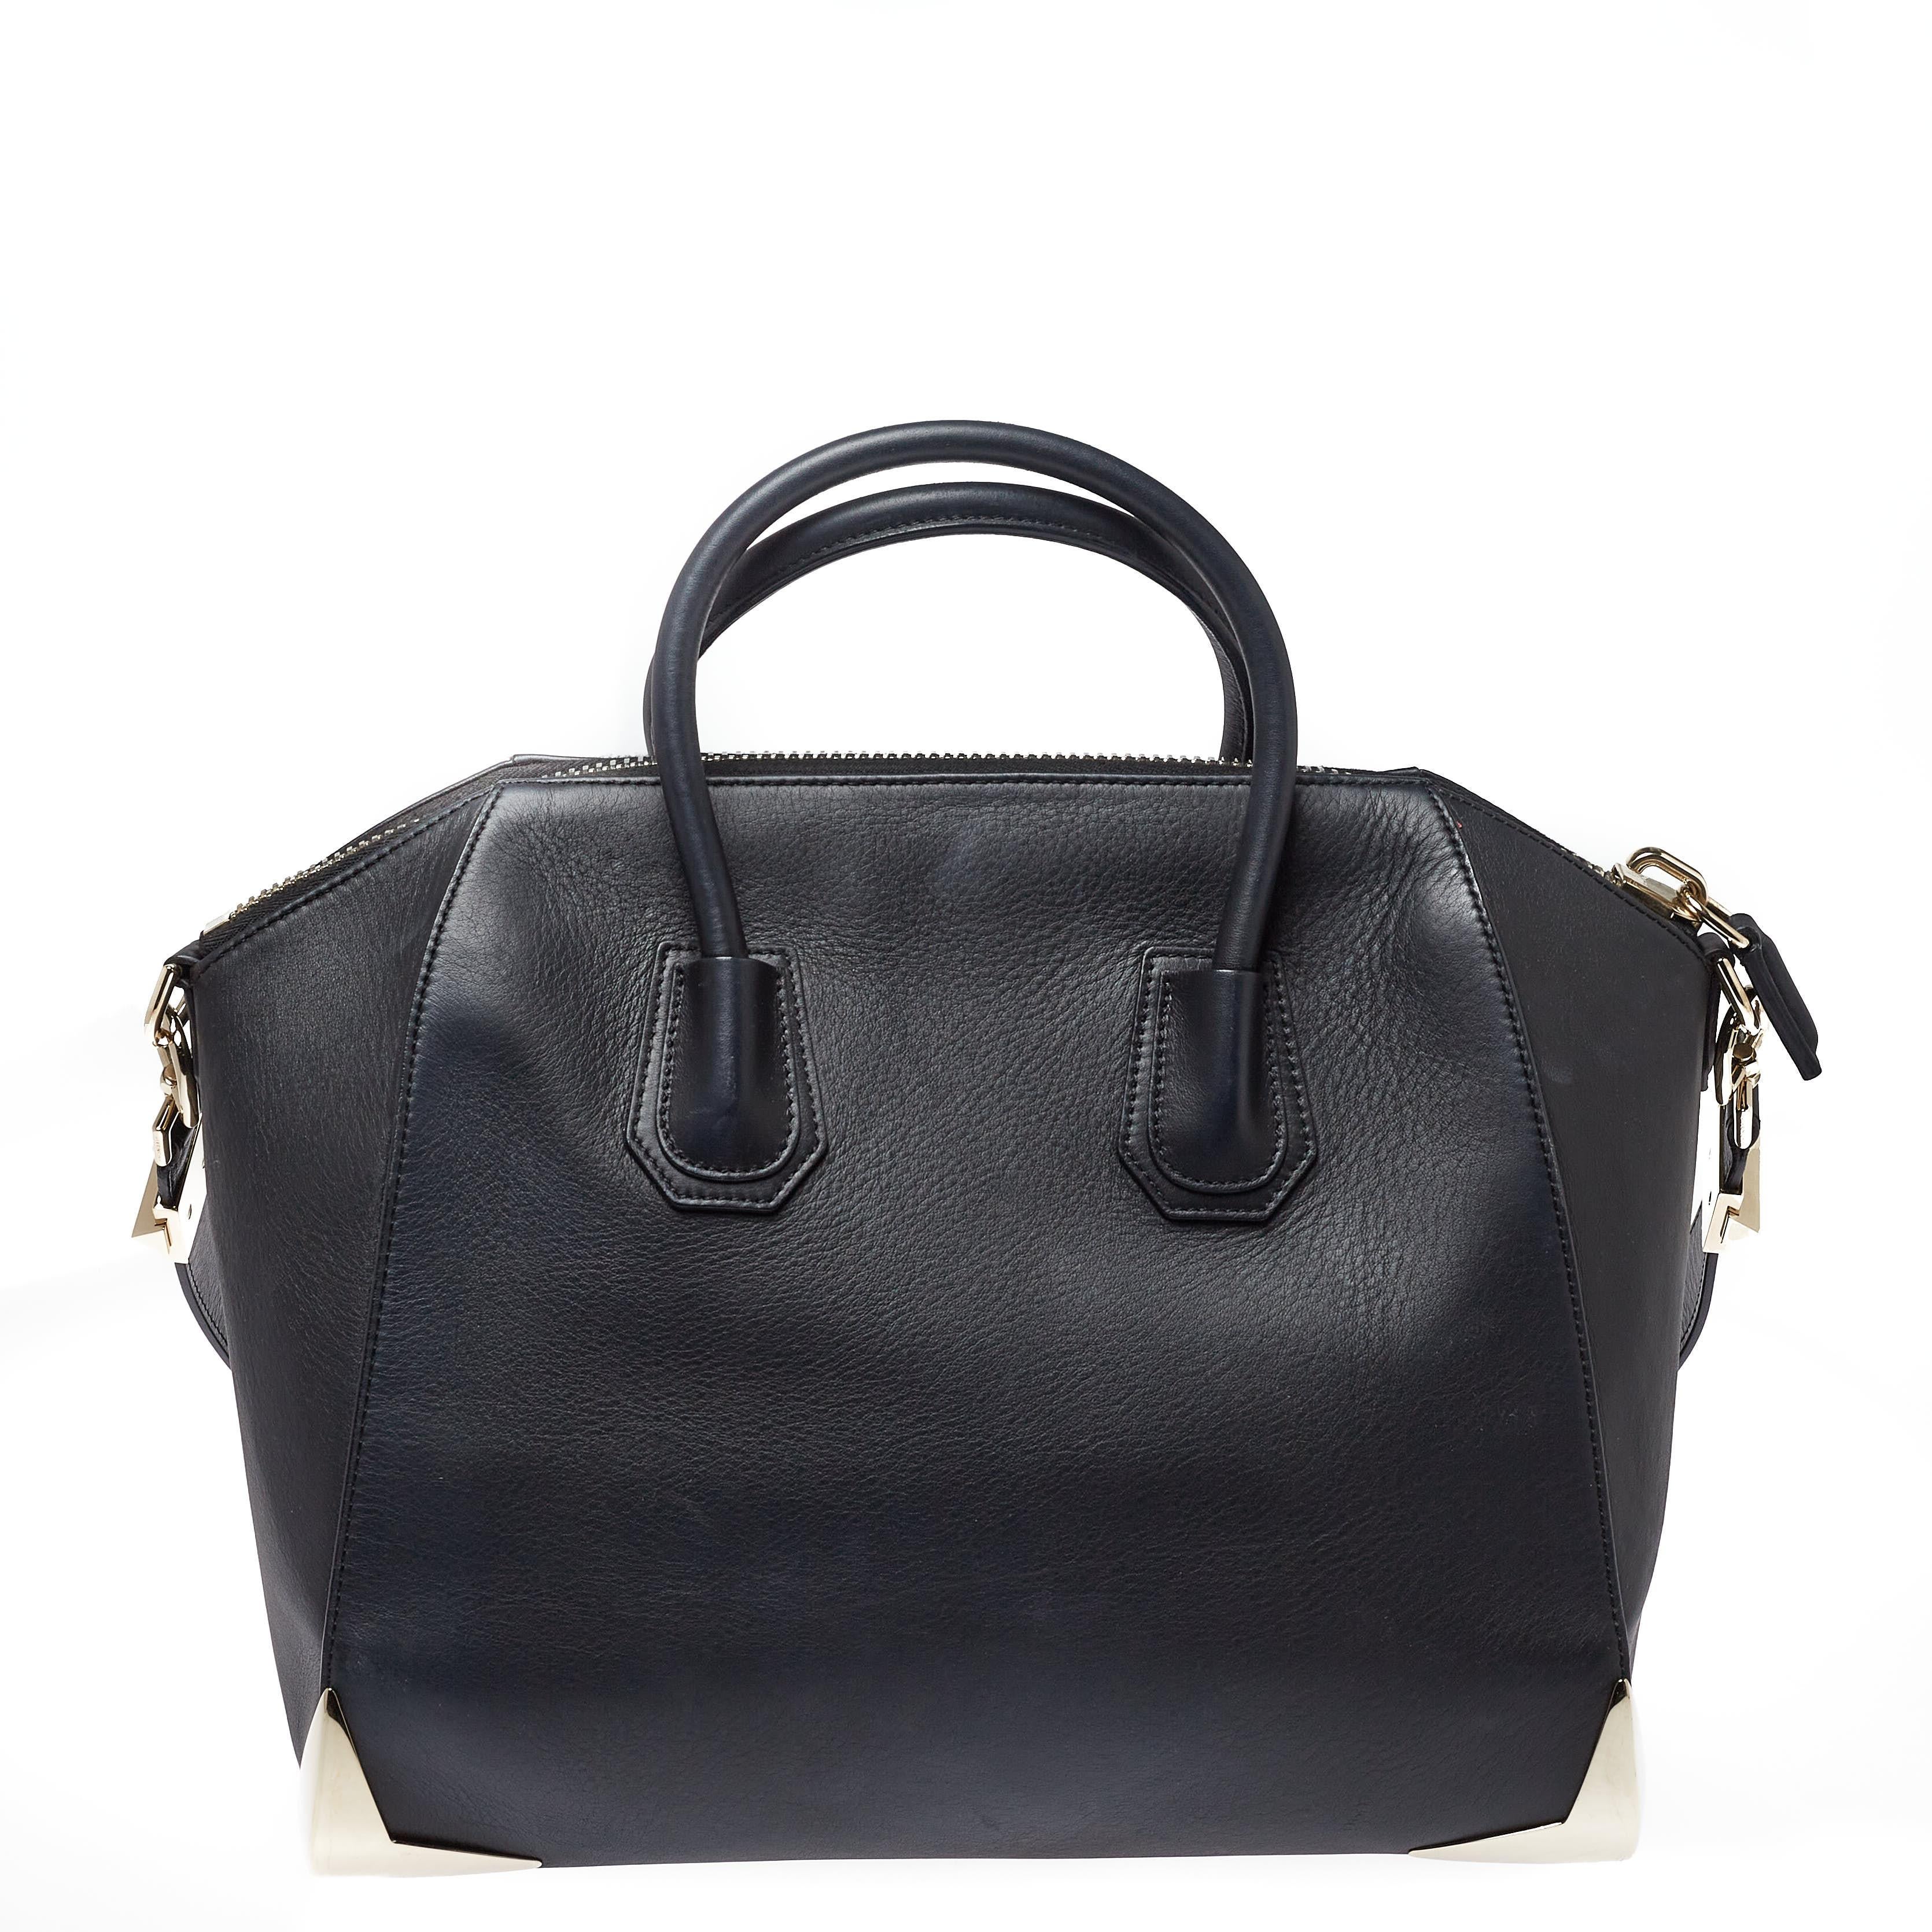 Made in Italy, and loved by women worldwide is this beautiful Antigona satchel by Givenchy. It has been crafted from leather and shaped elegantly. The black bag has metal detailing and a top zipper that reveals a fabric interior and it is held by